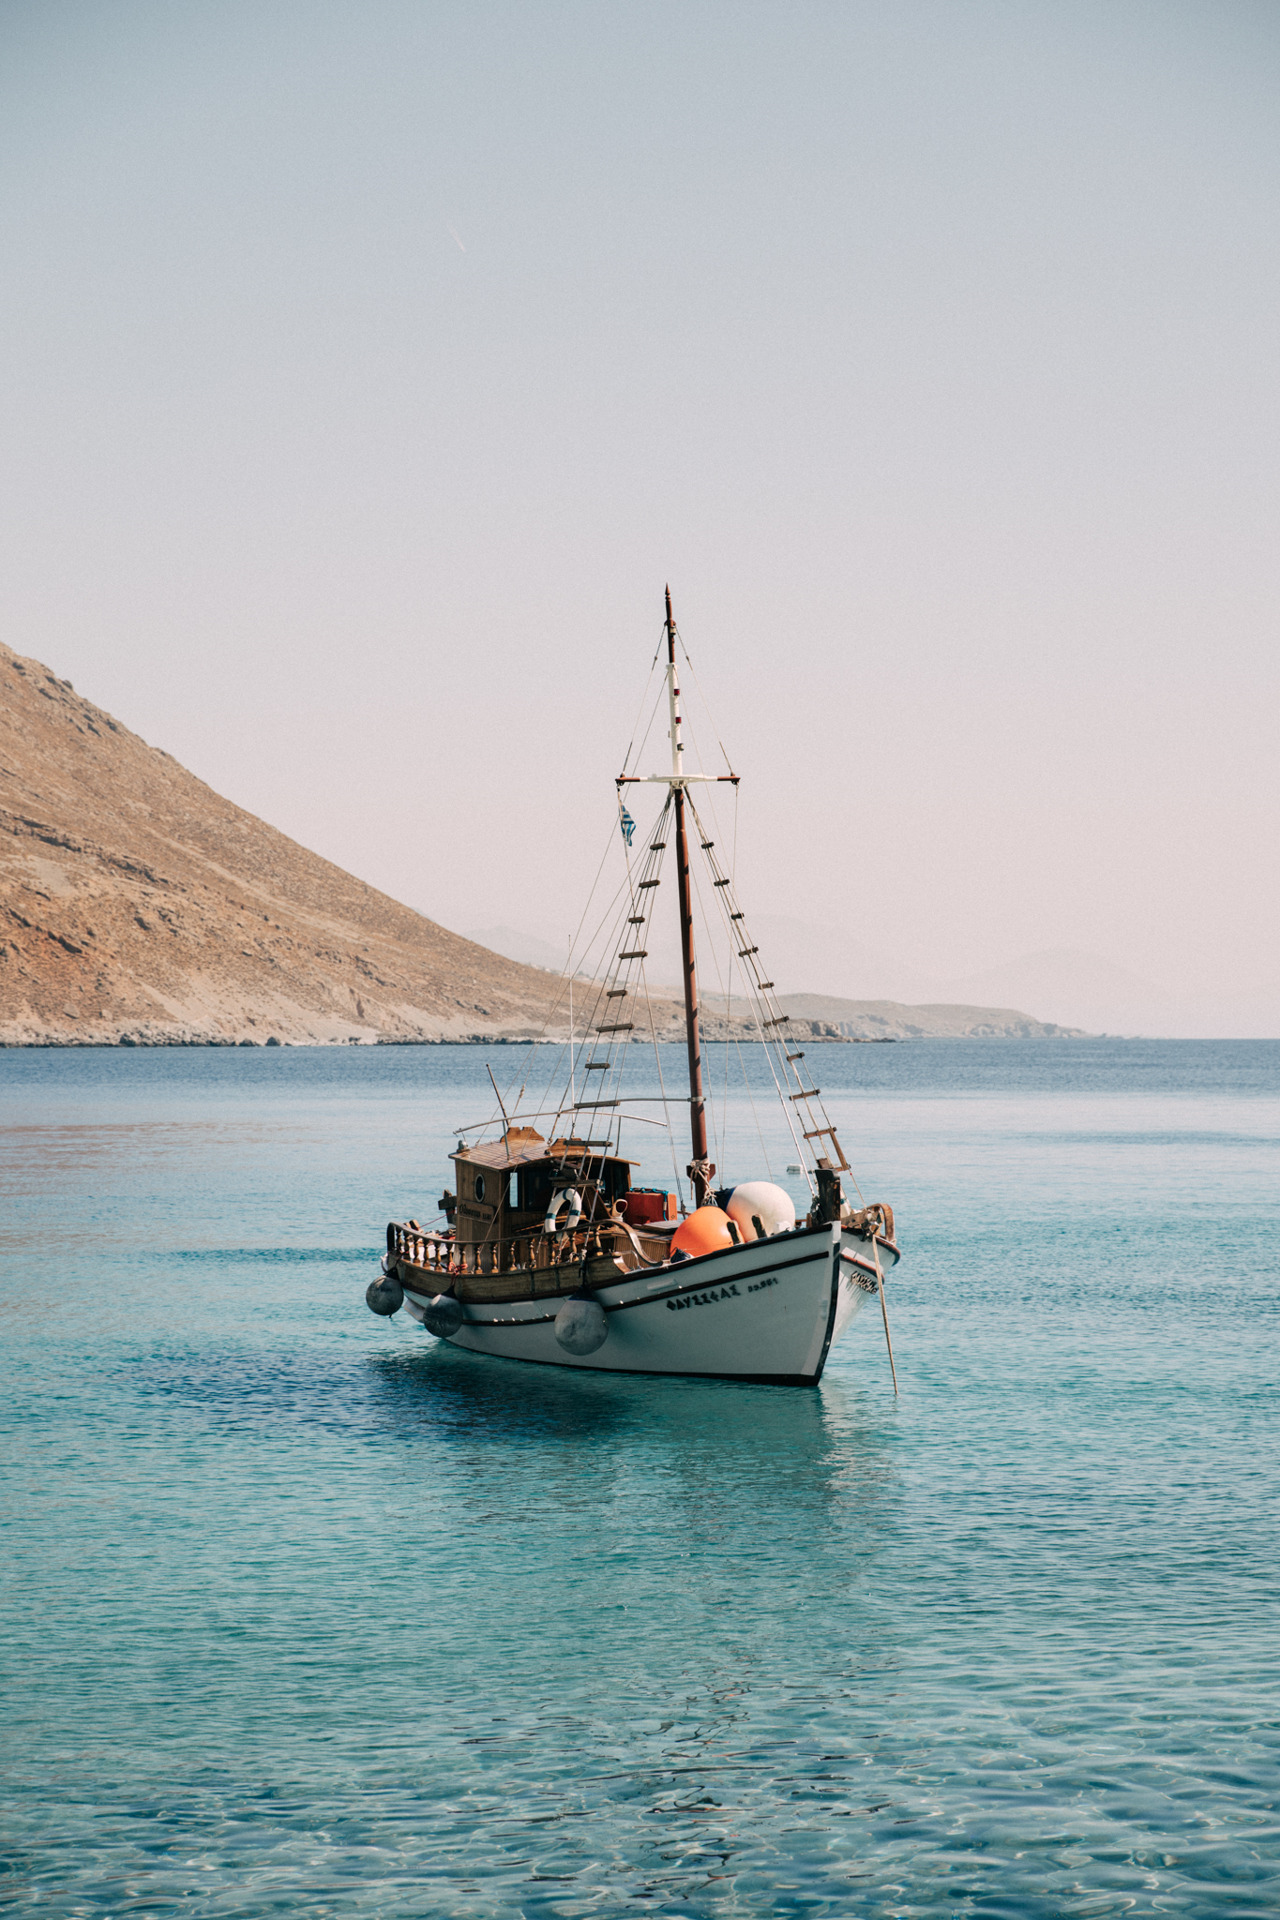 There are boats in Loutro that visit nearby beaches